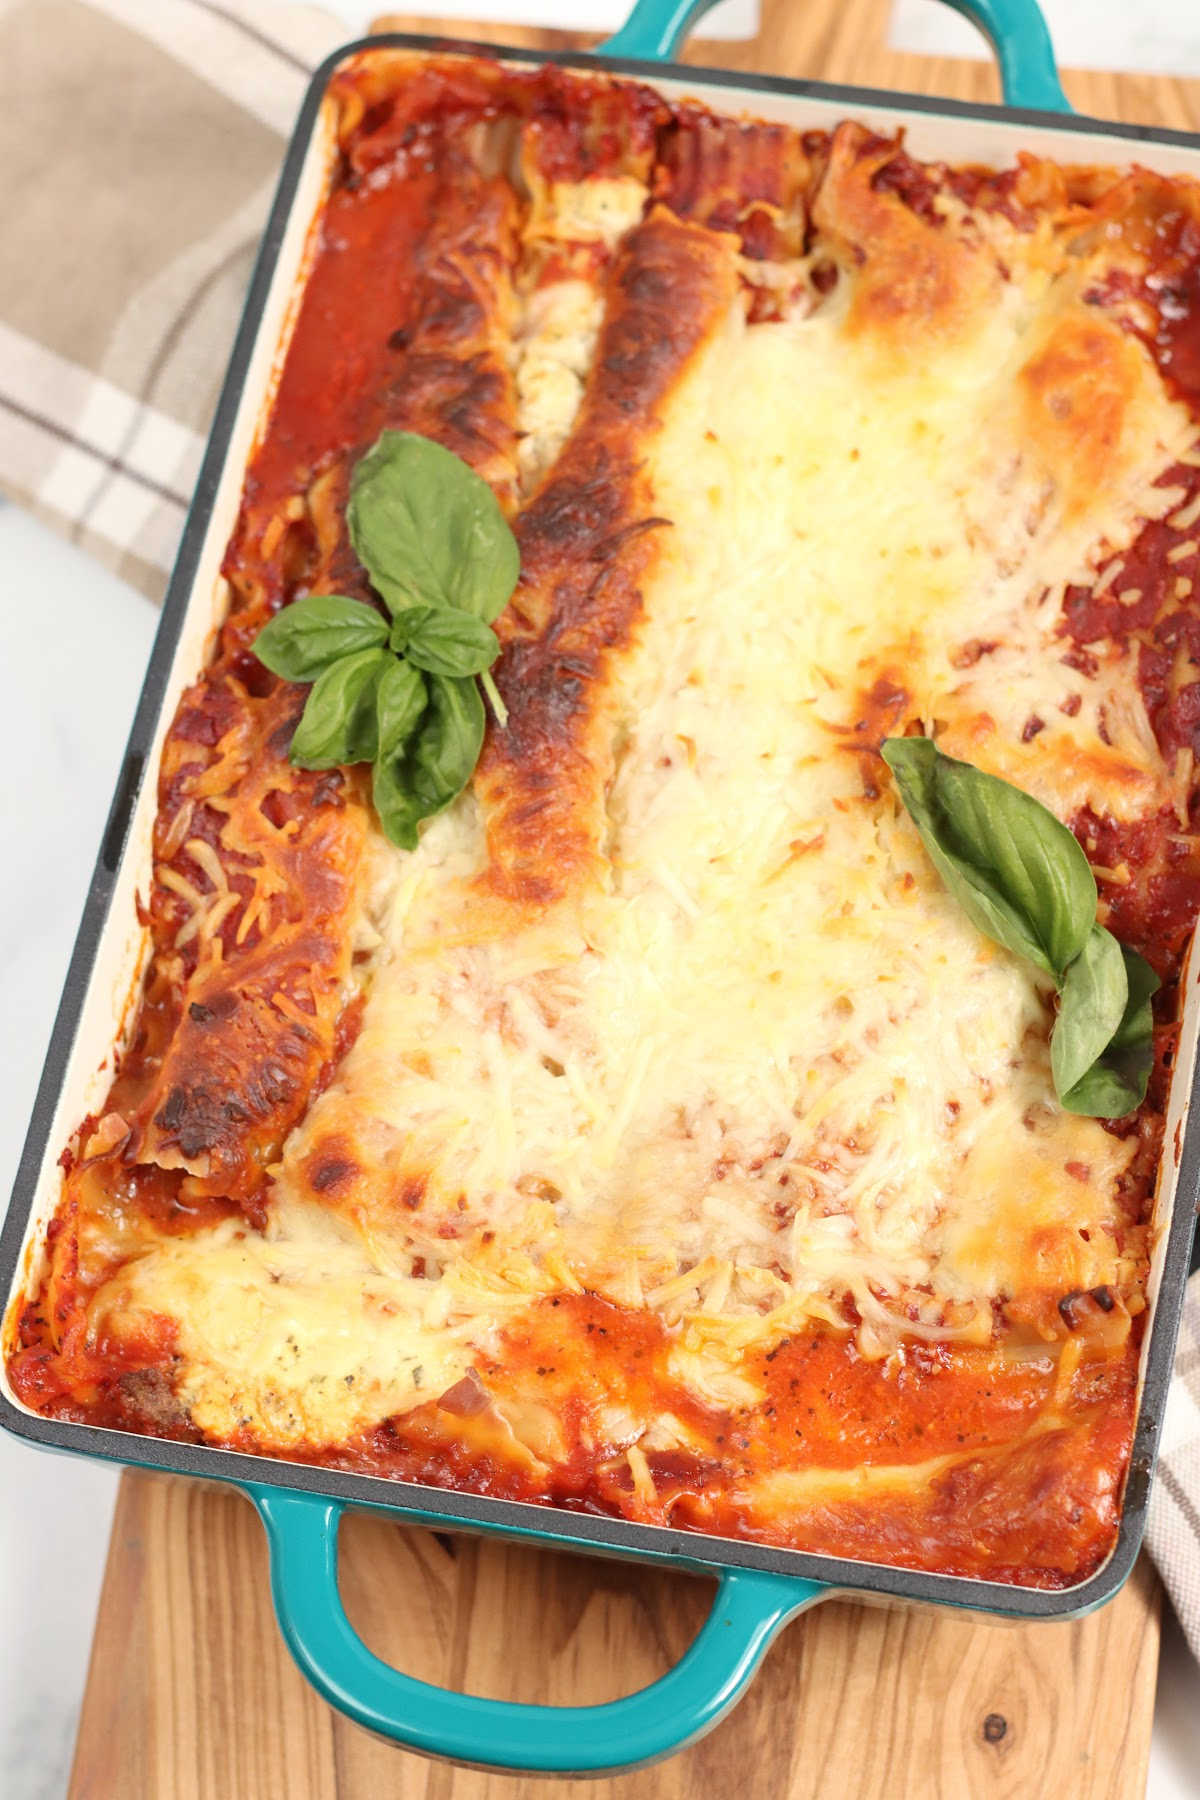 Lasagna with golden browned crust in teal green baking pan with two handles.